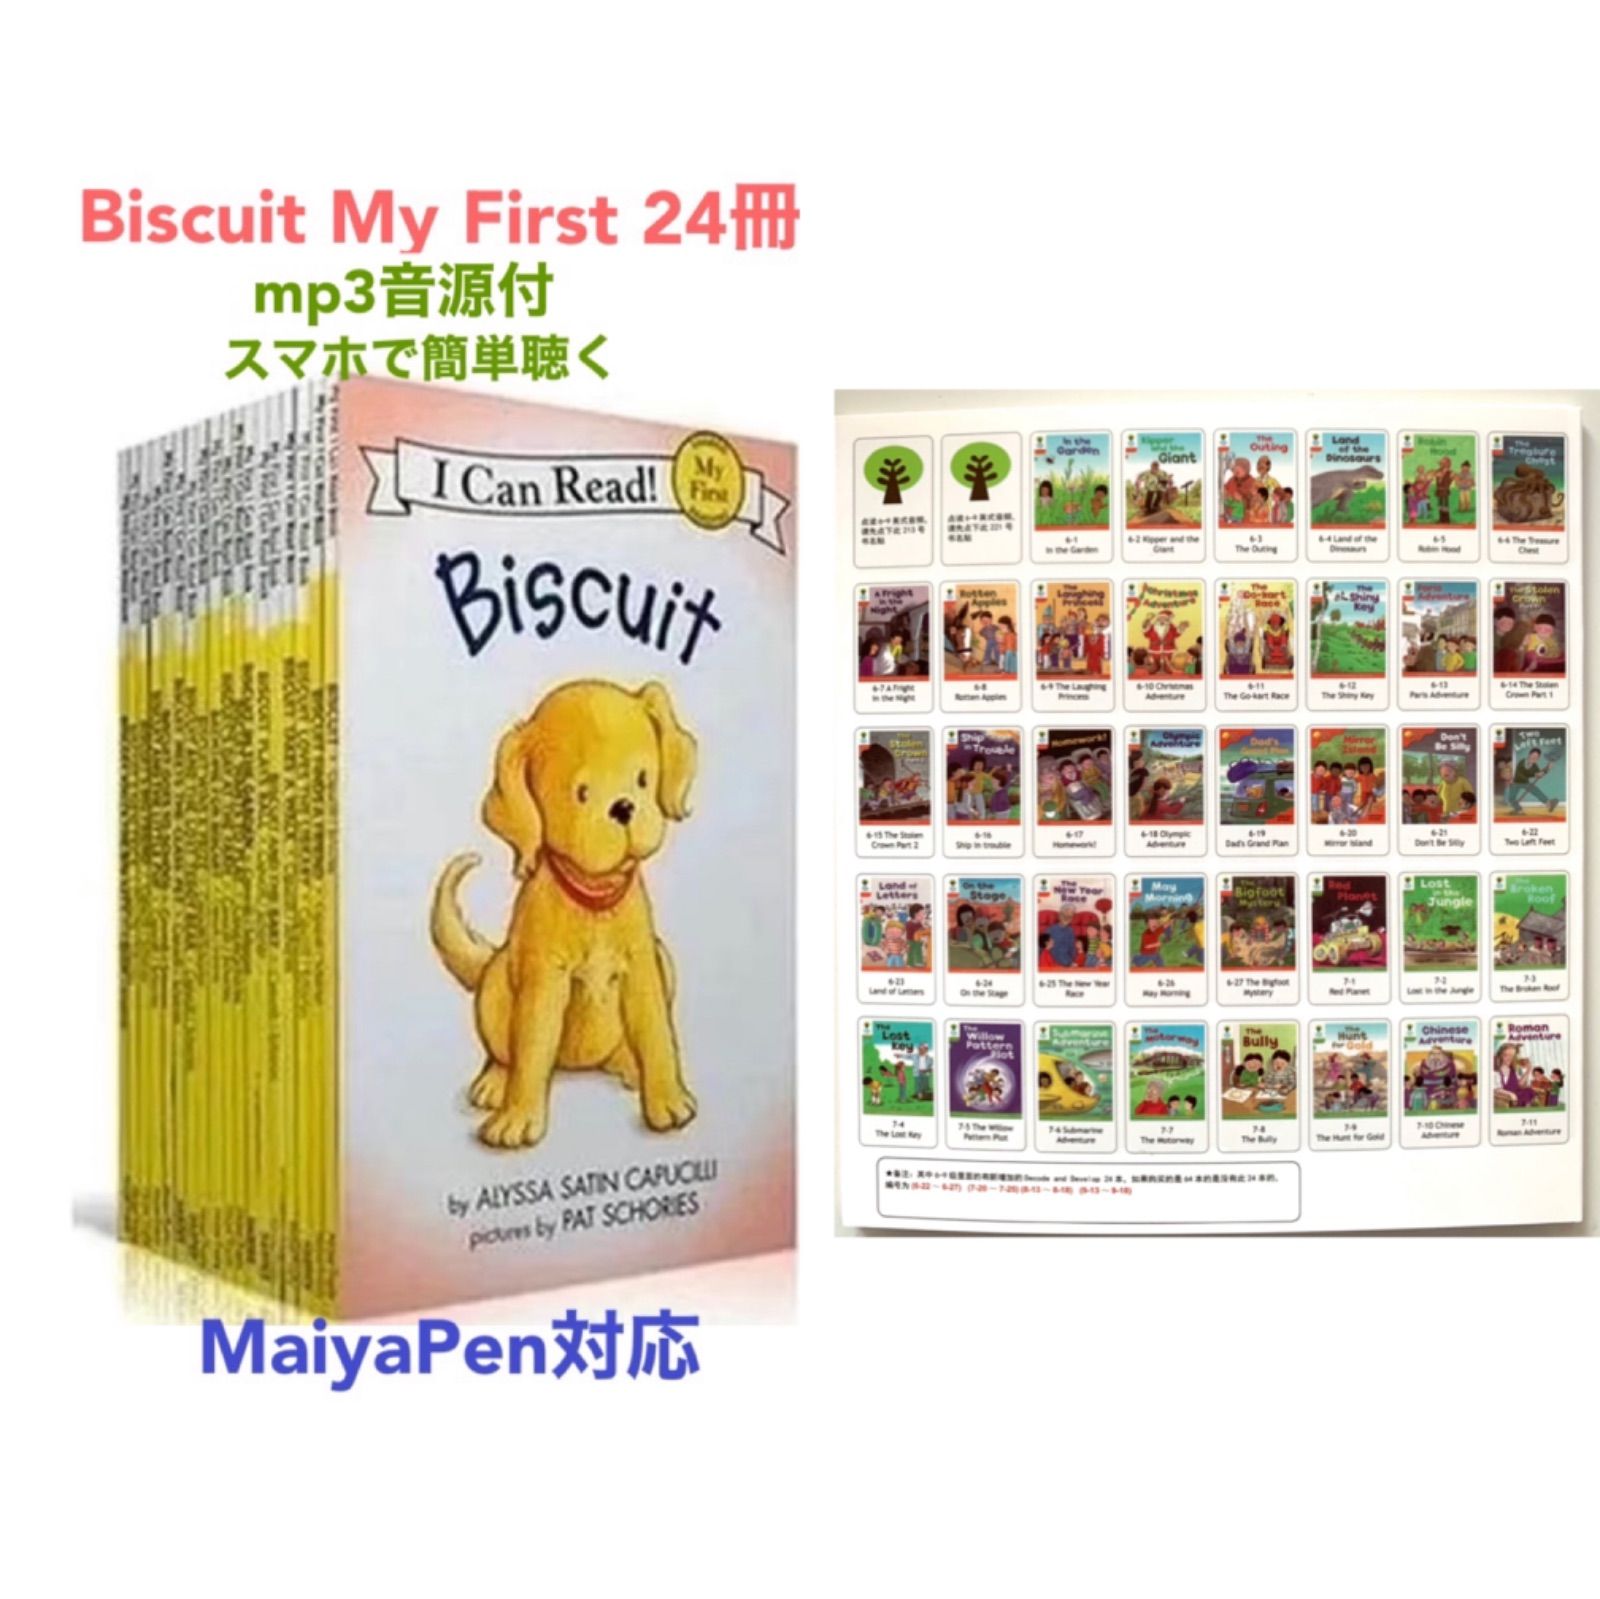 Liao絵本130冊＆マイヤペンBiscuit My First 24冊付お得セット 全冊